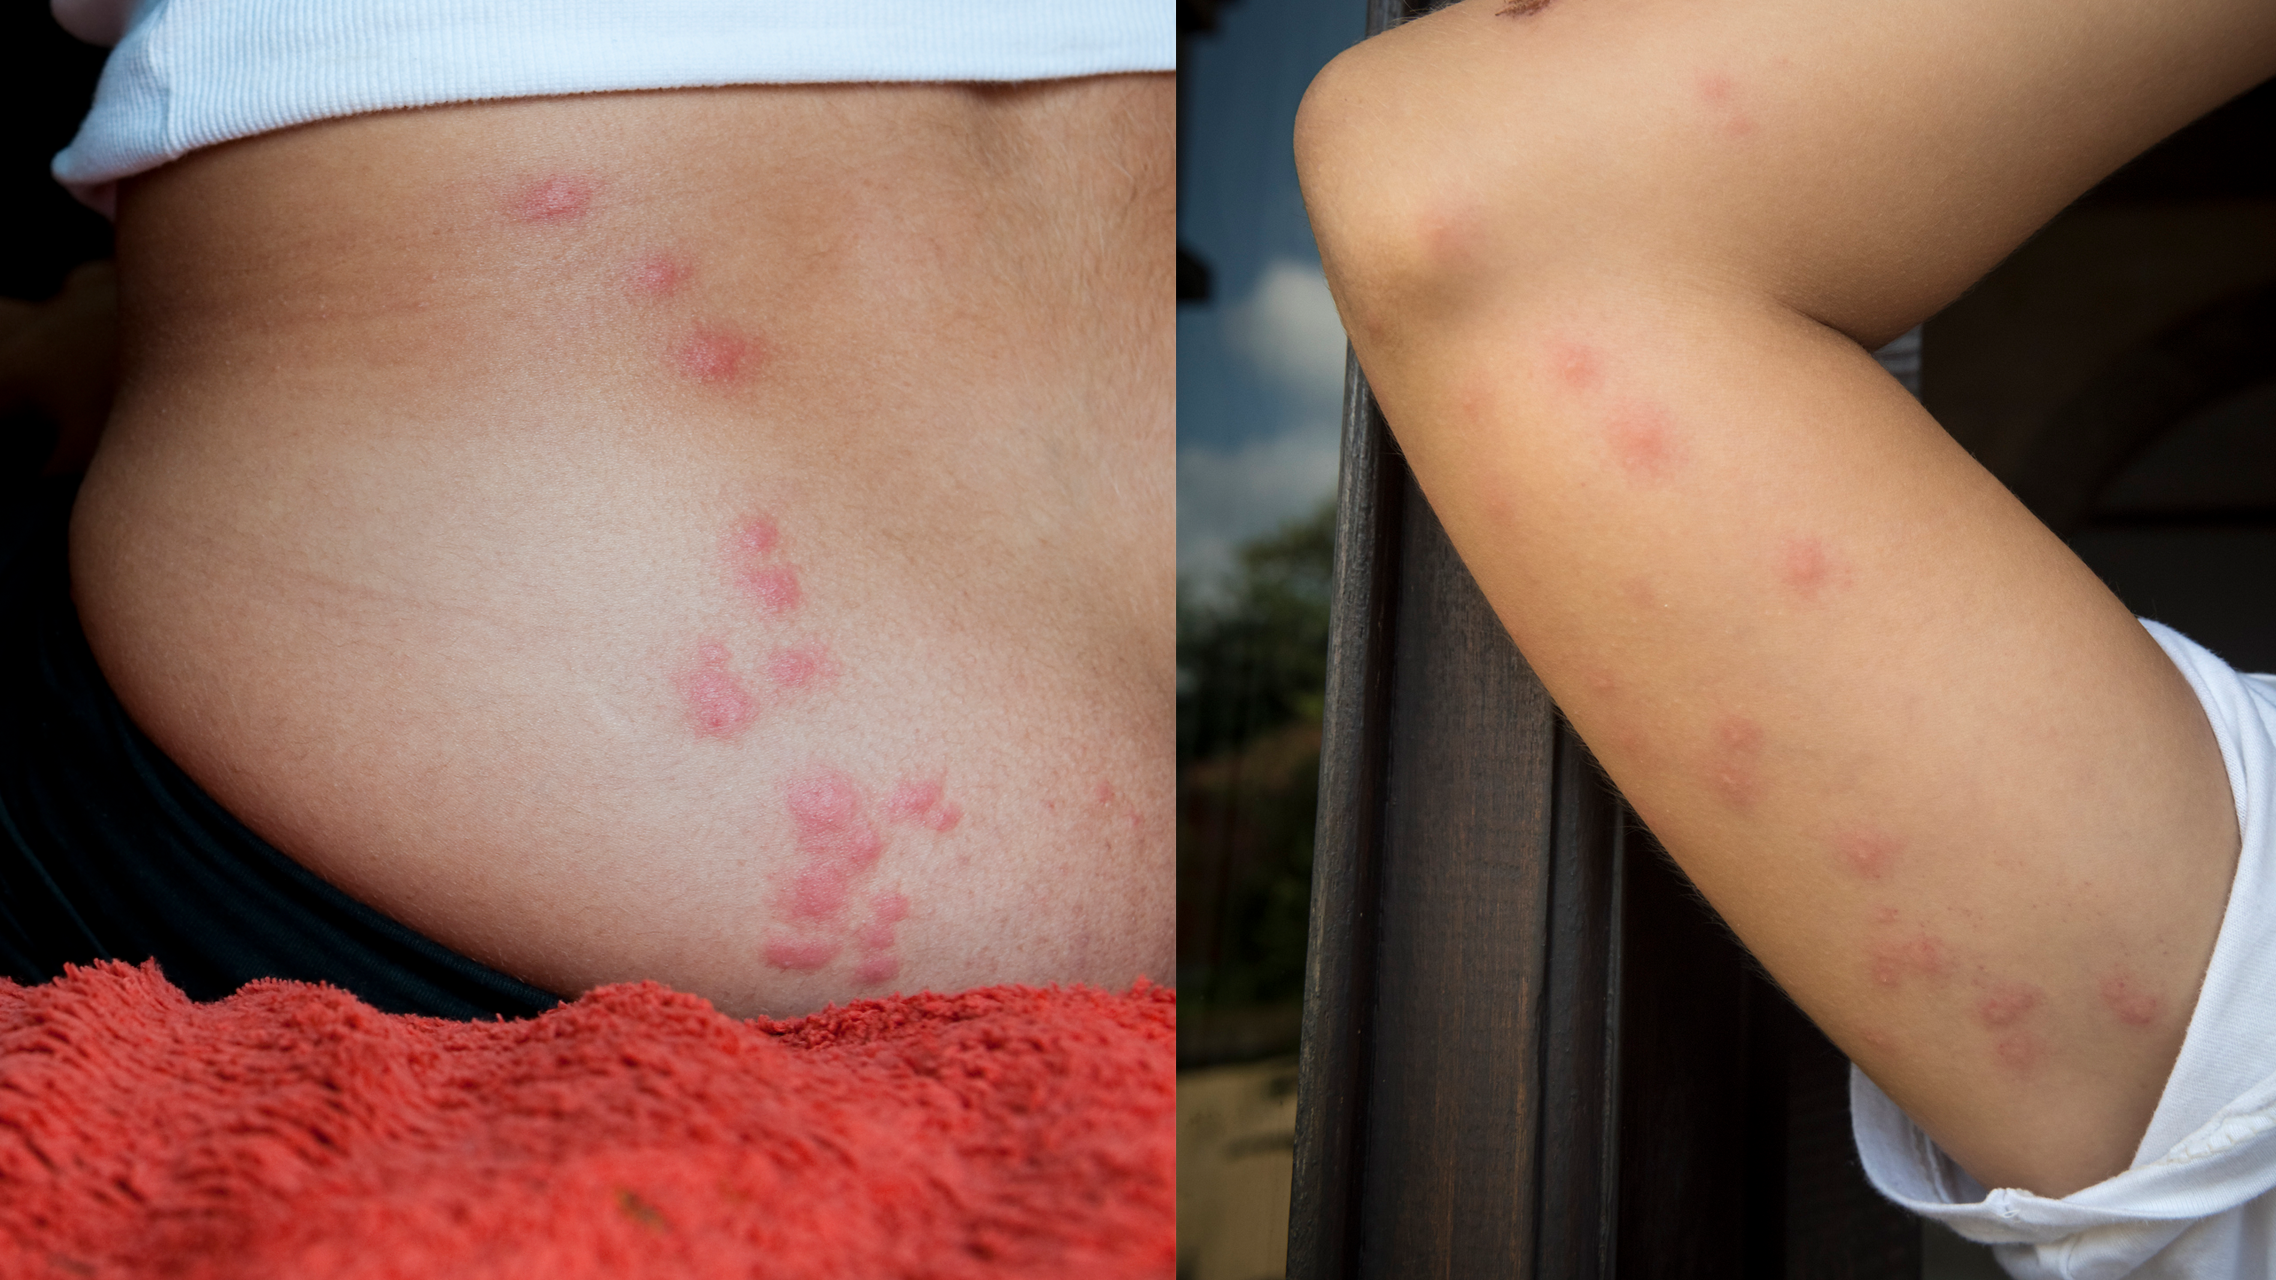 Bed Bug Bites Pictures, Symptoms: What Do Bed Bug Bites Look Like?